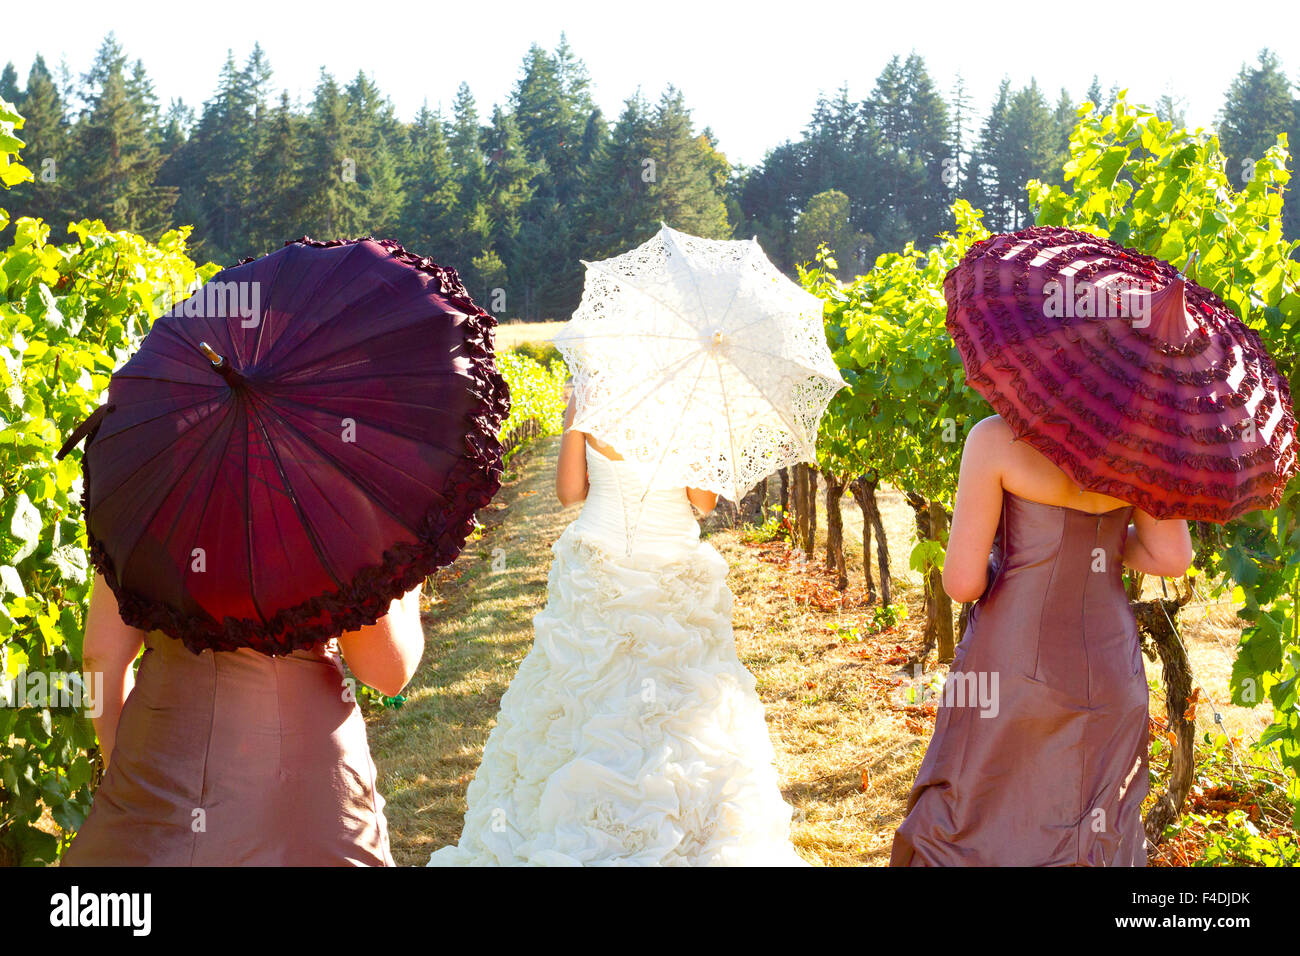 Parasol held by the bride on her wedding day in a vineyard. Stock Photo